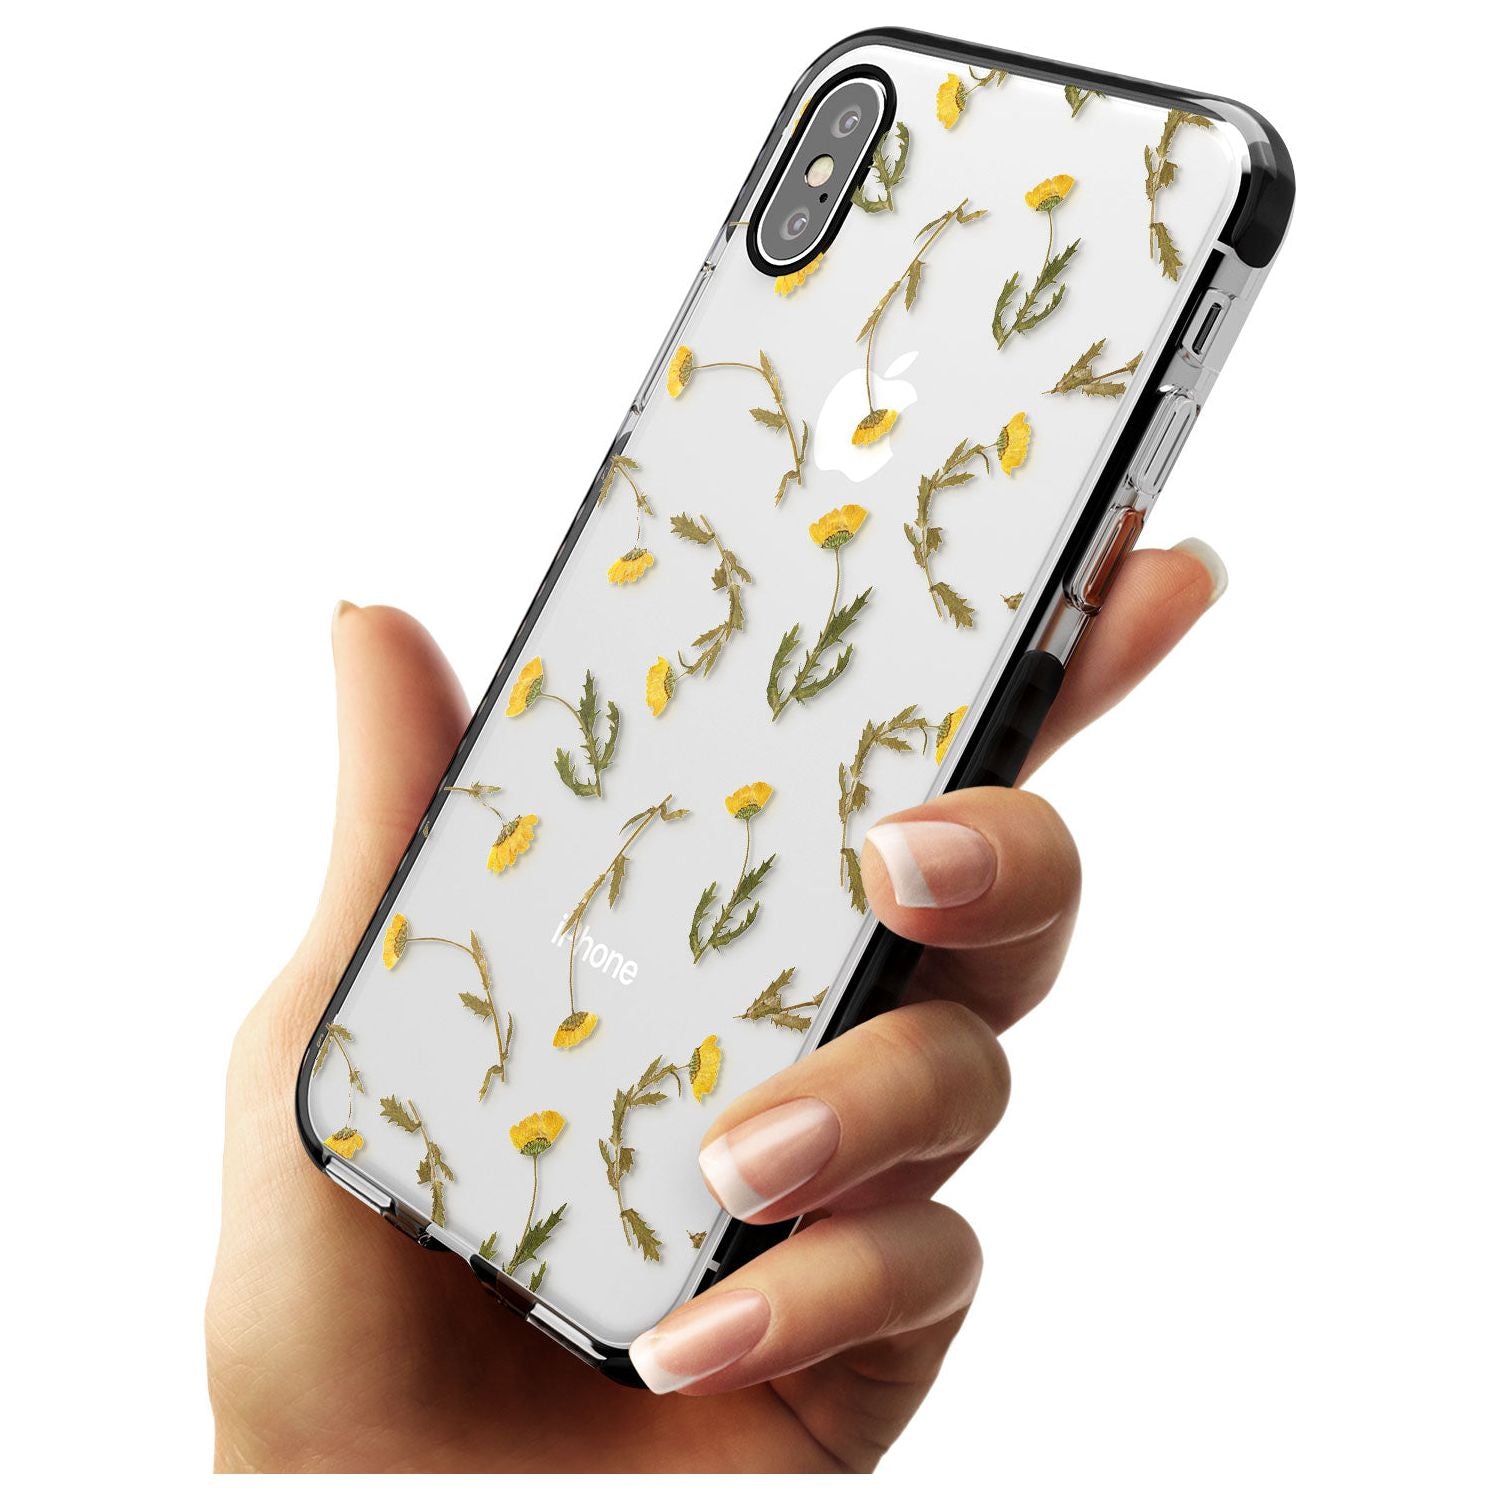 Long Stemmed Wildflowers - Dried Flower-Inspired Black Impact Phone Case for iPhone X XS Max XR